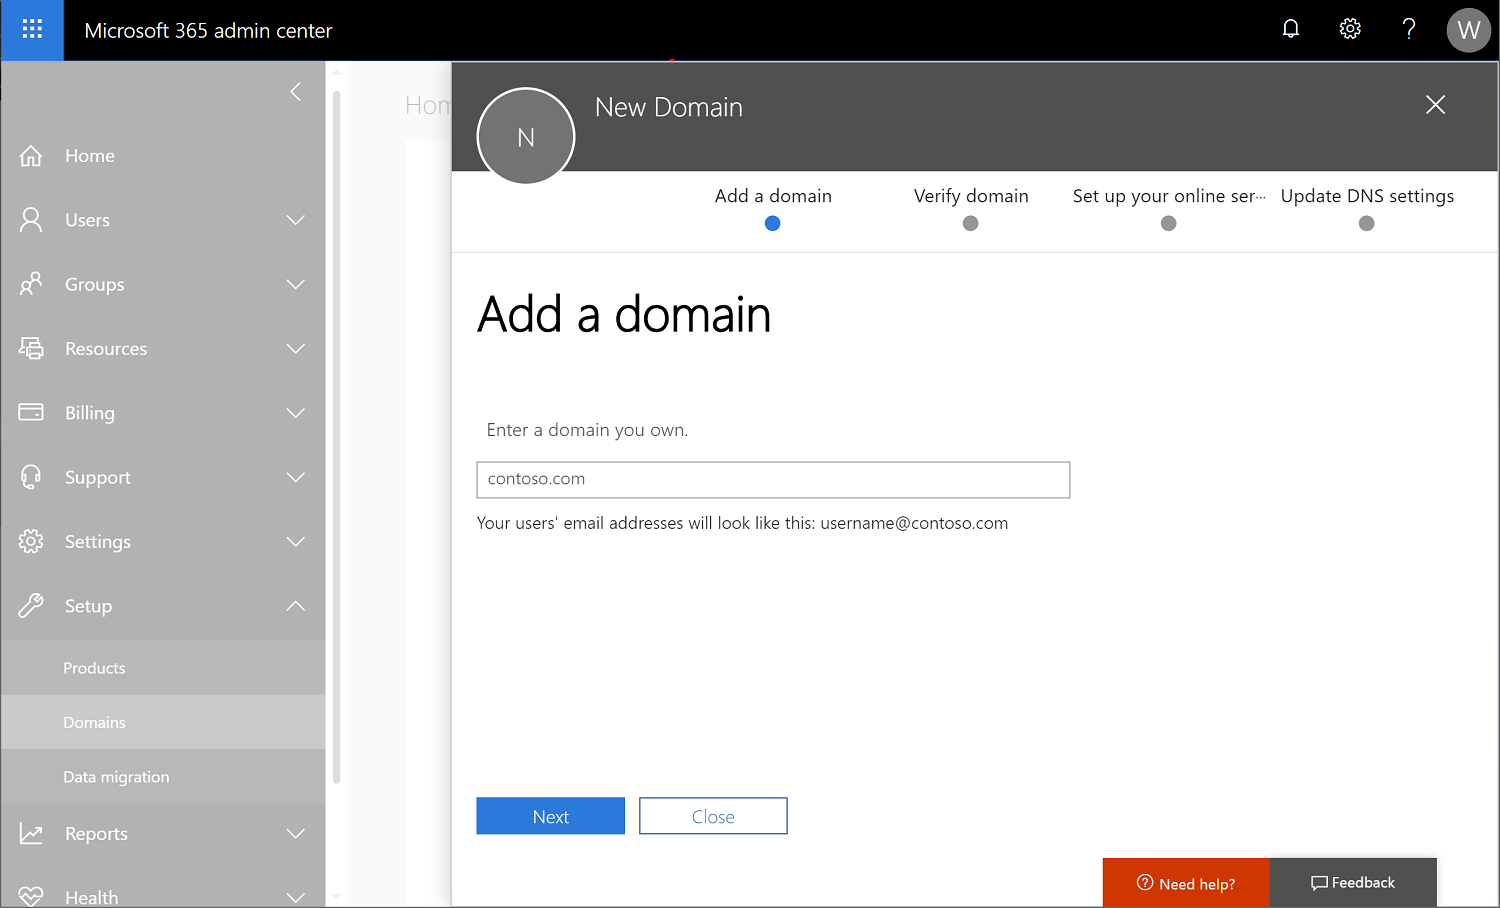 Screenshot of Microsoft 365 admin center with Settings > Domains selected and a new domain name being added